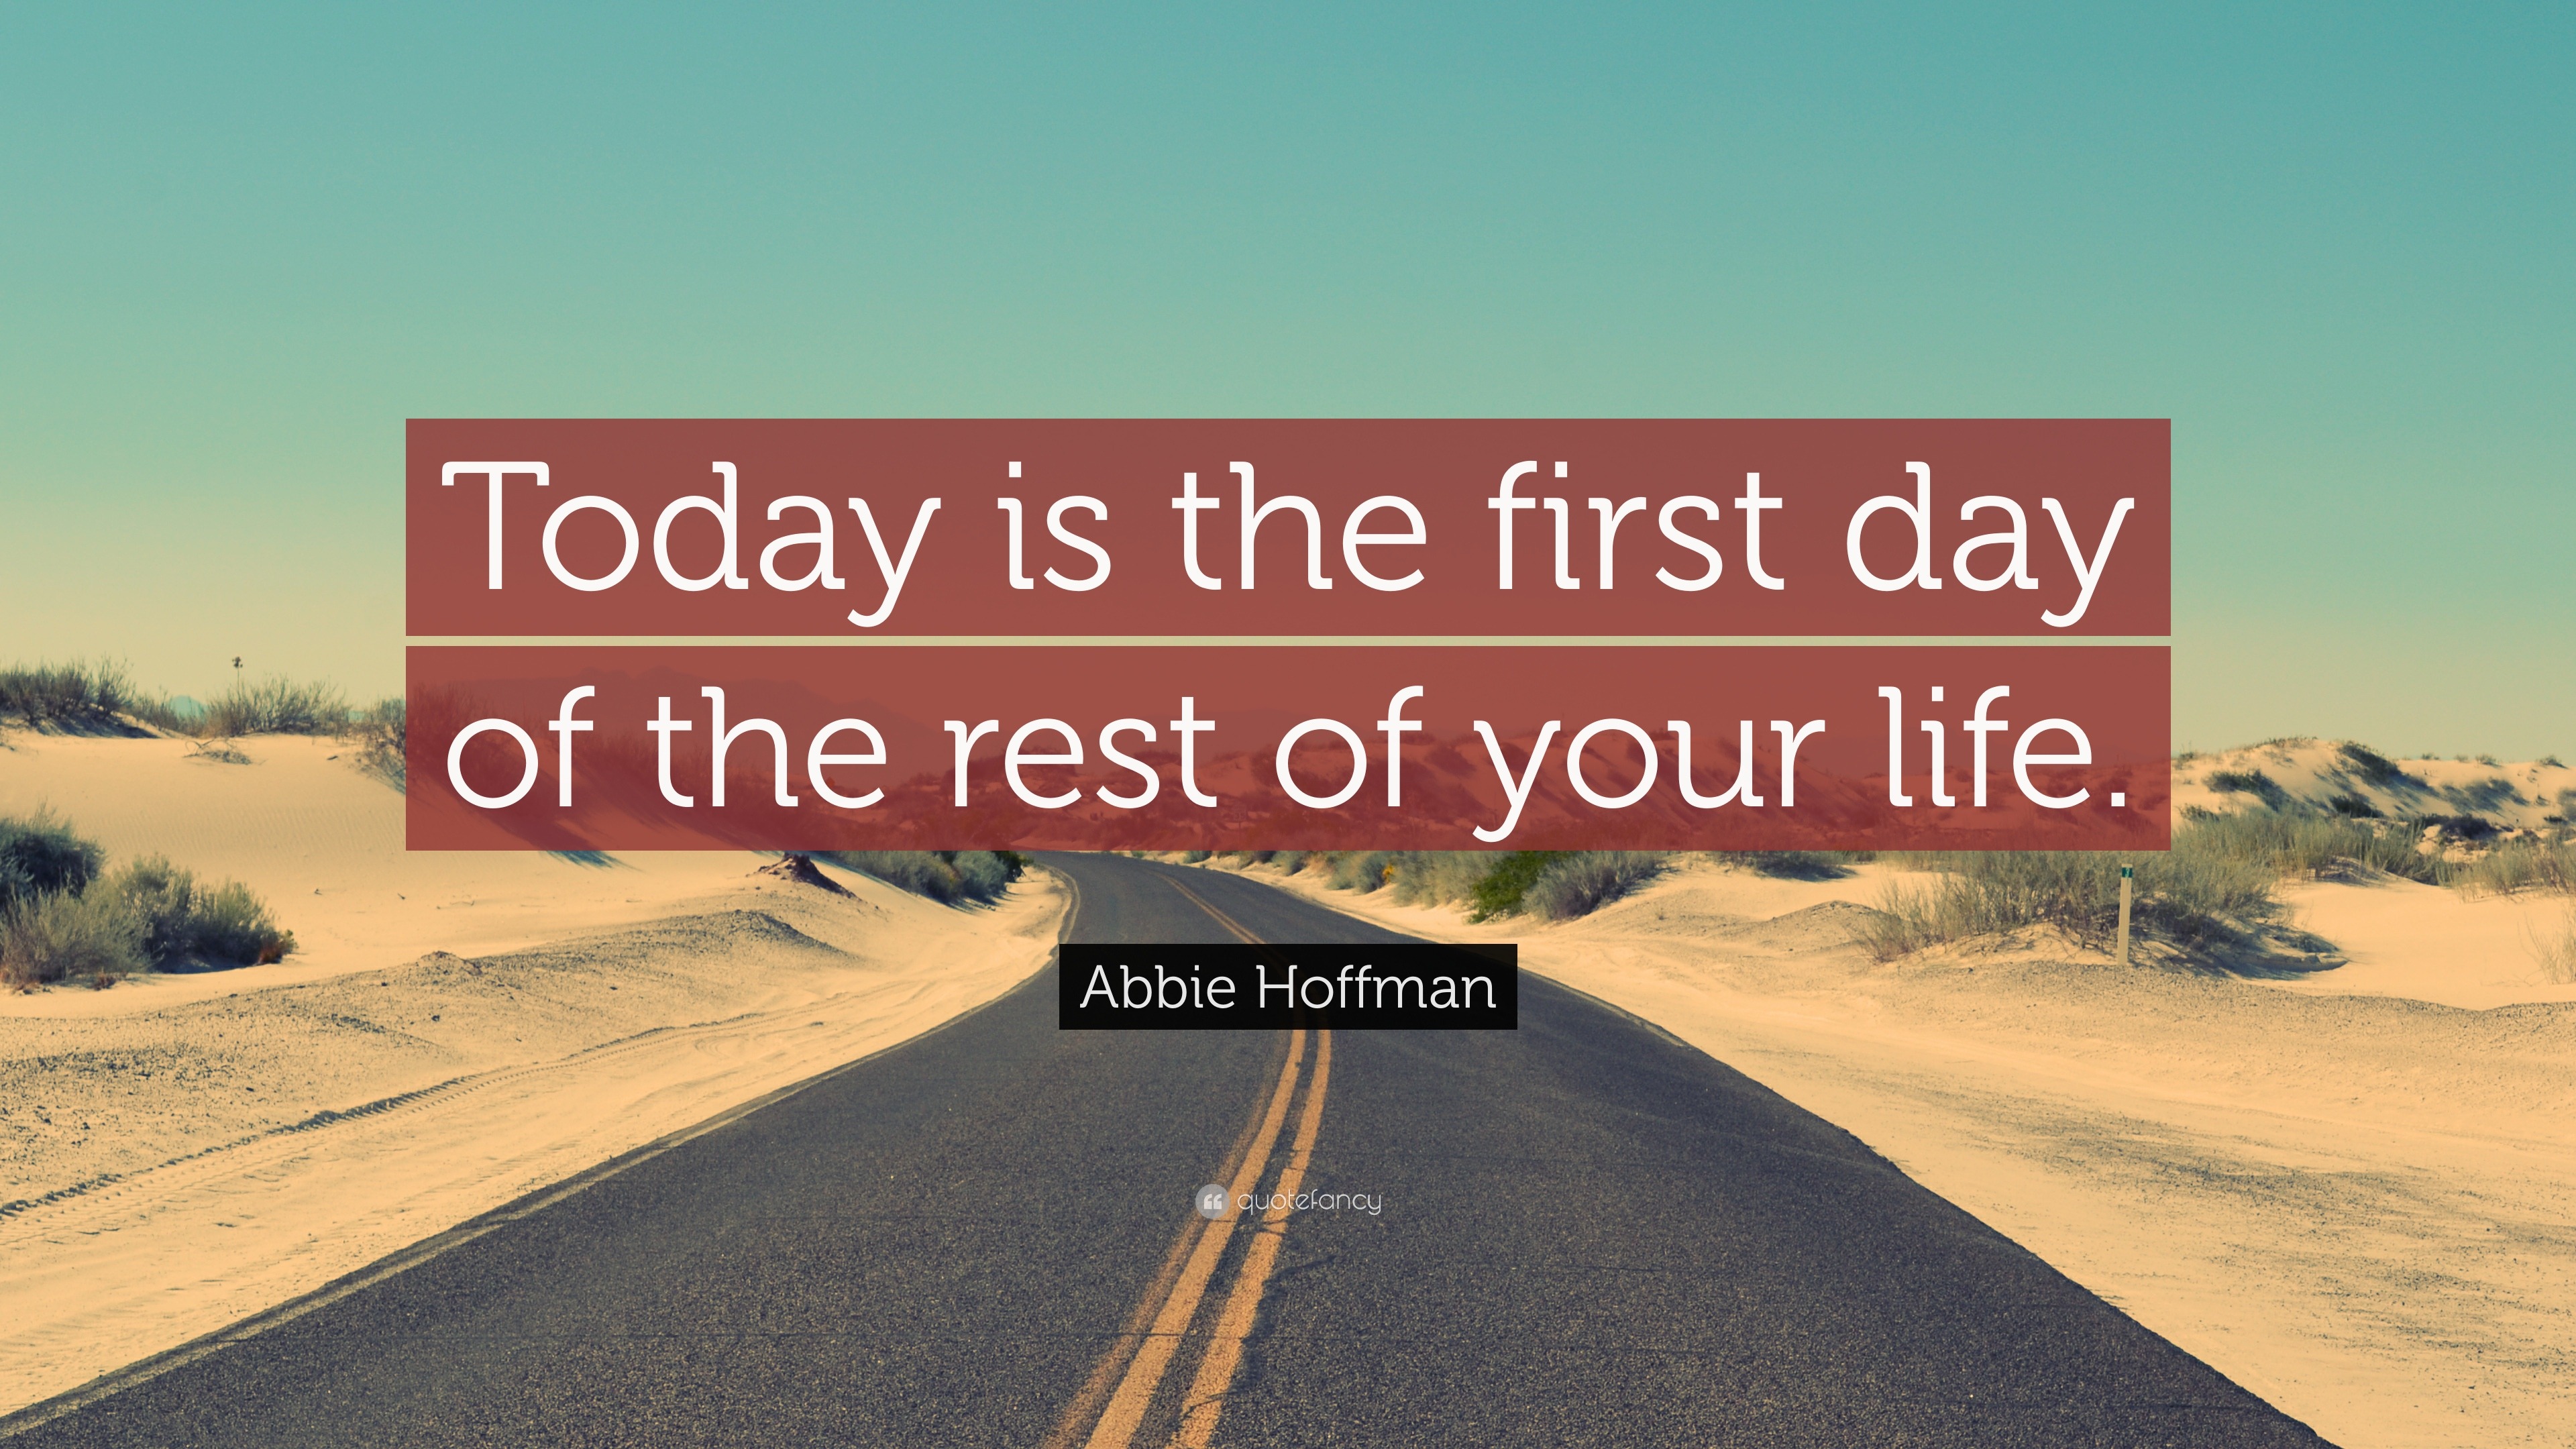 Abbie Hoffman Quote “Today is the first day of the rest